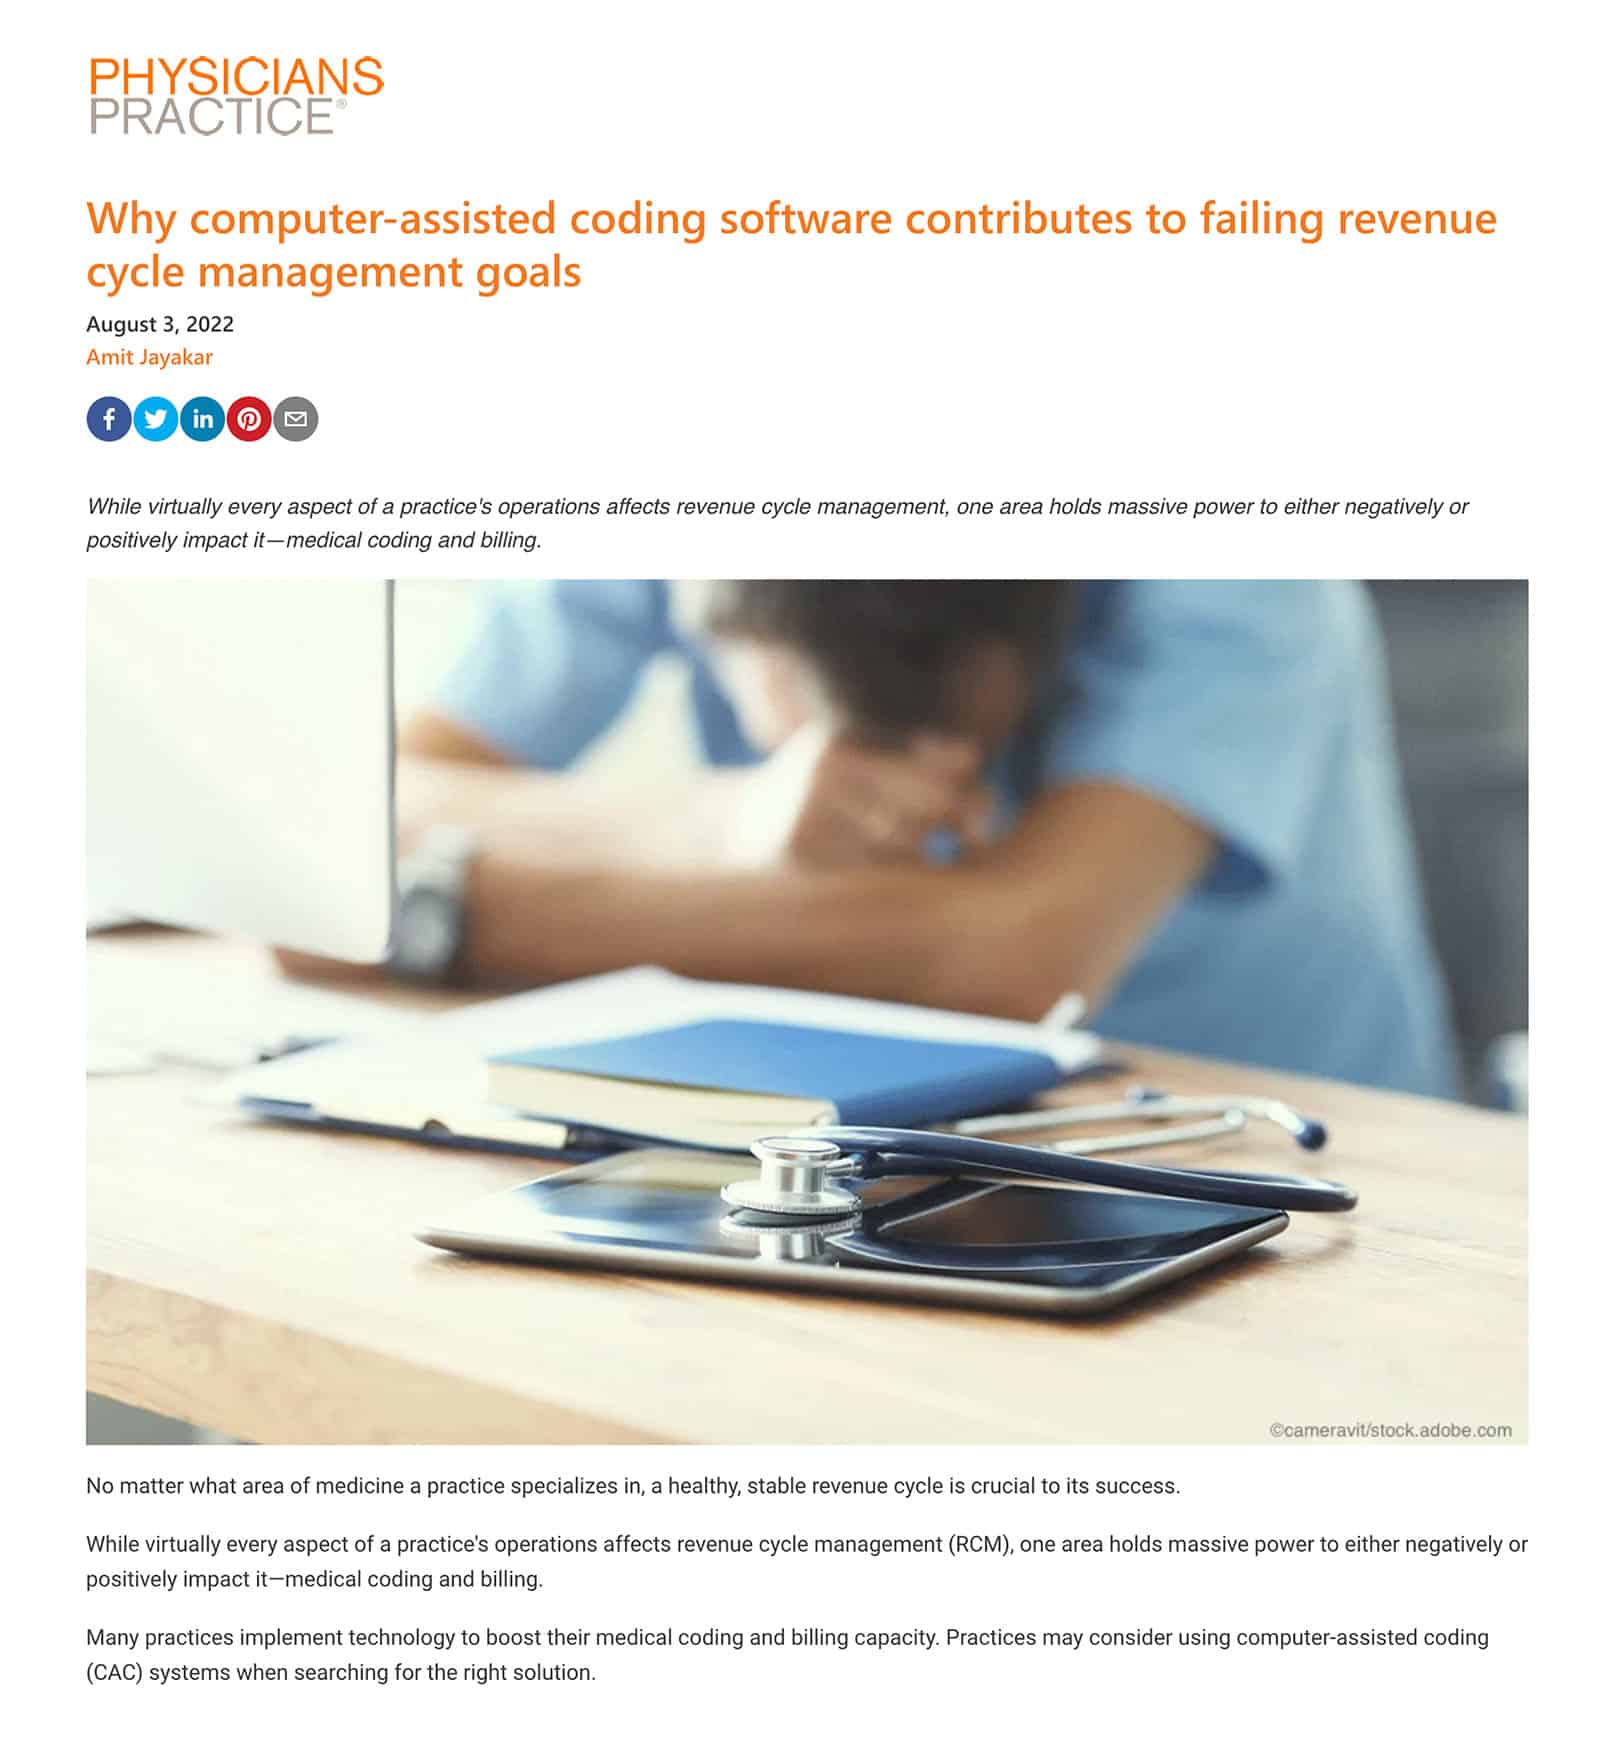 Fathom PR article in Physicians Practice